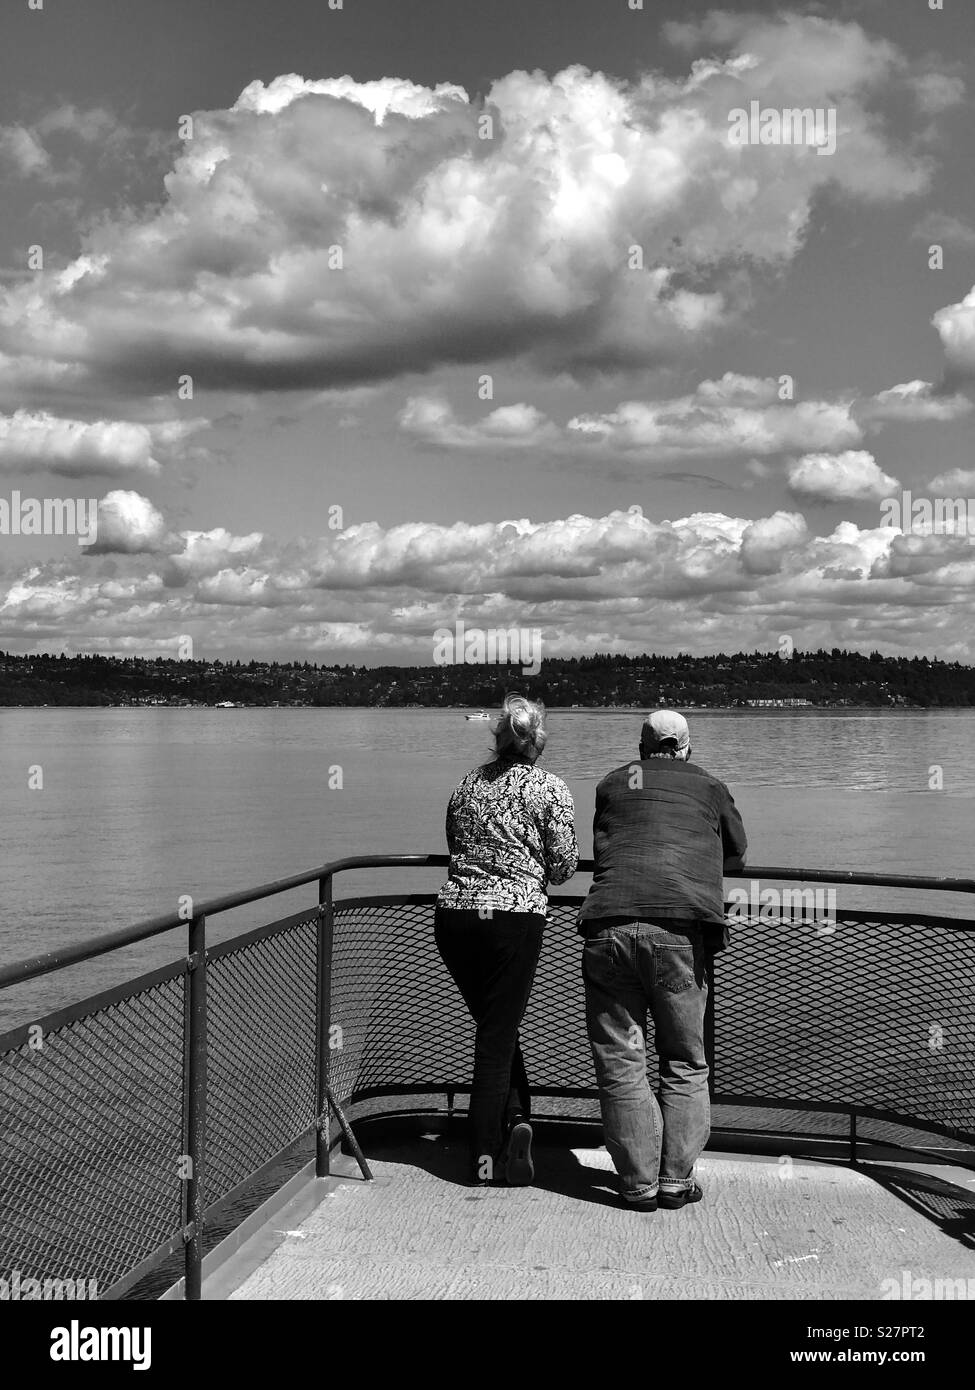 Couple on deck of Puget Sound Ferry, Seattle, Washington - July - Black and White Stock Photo